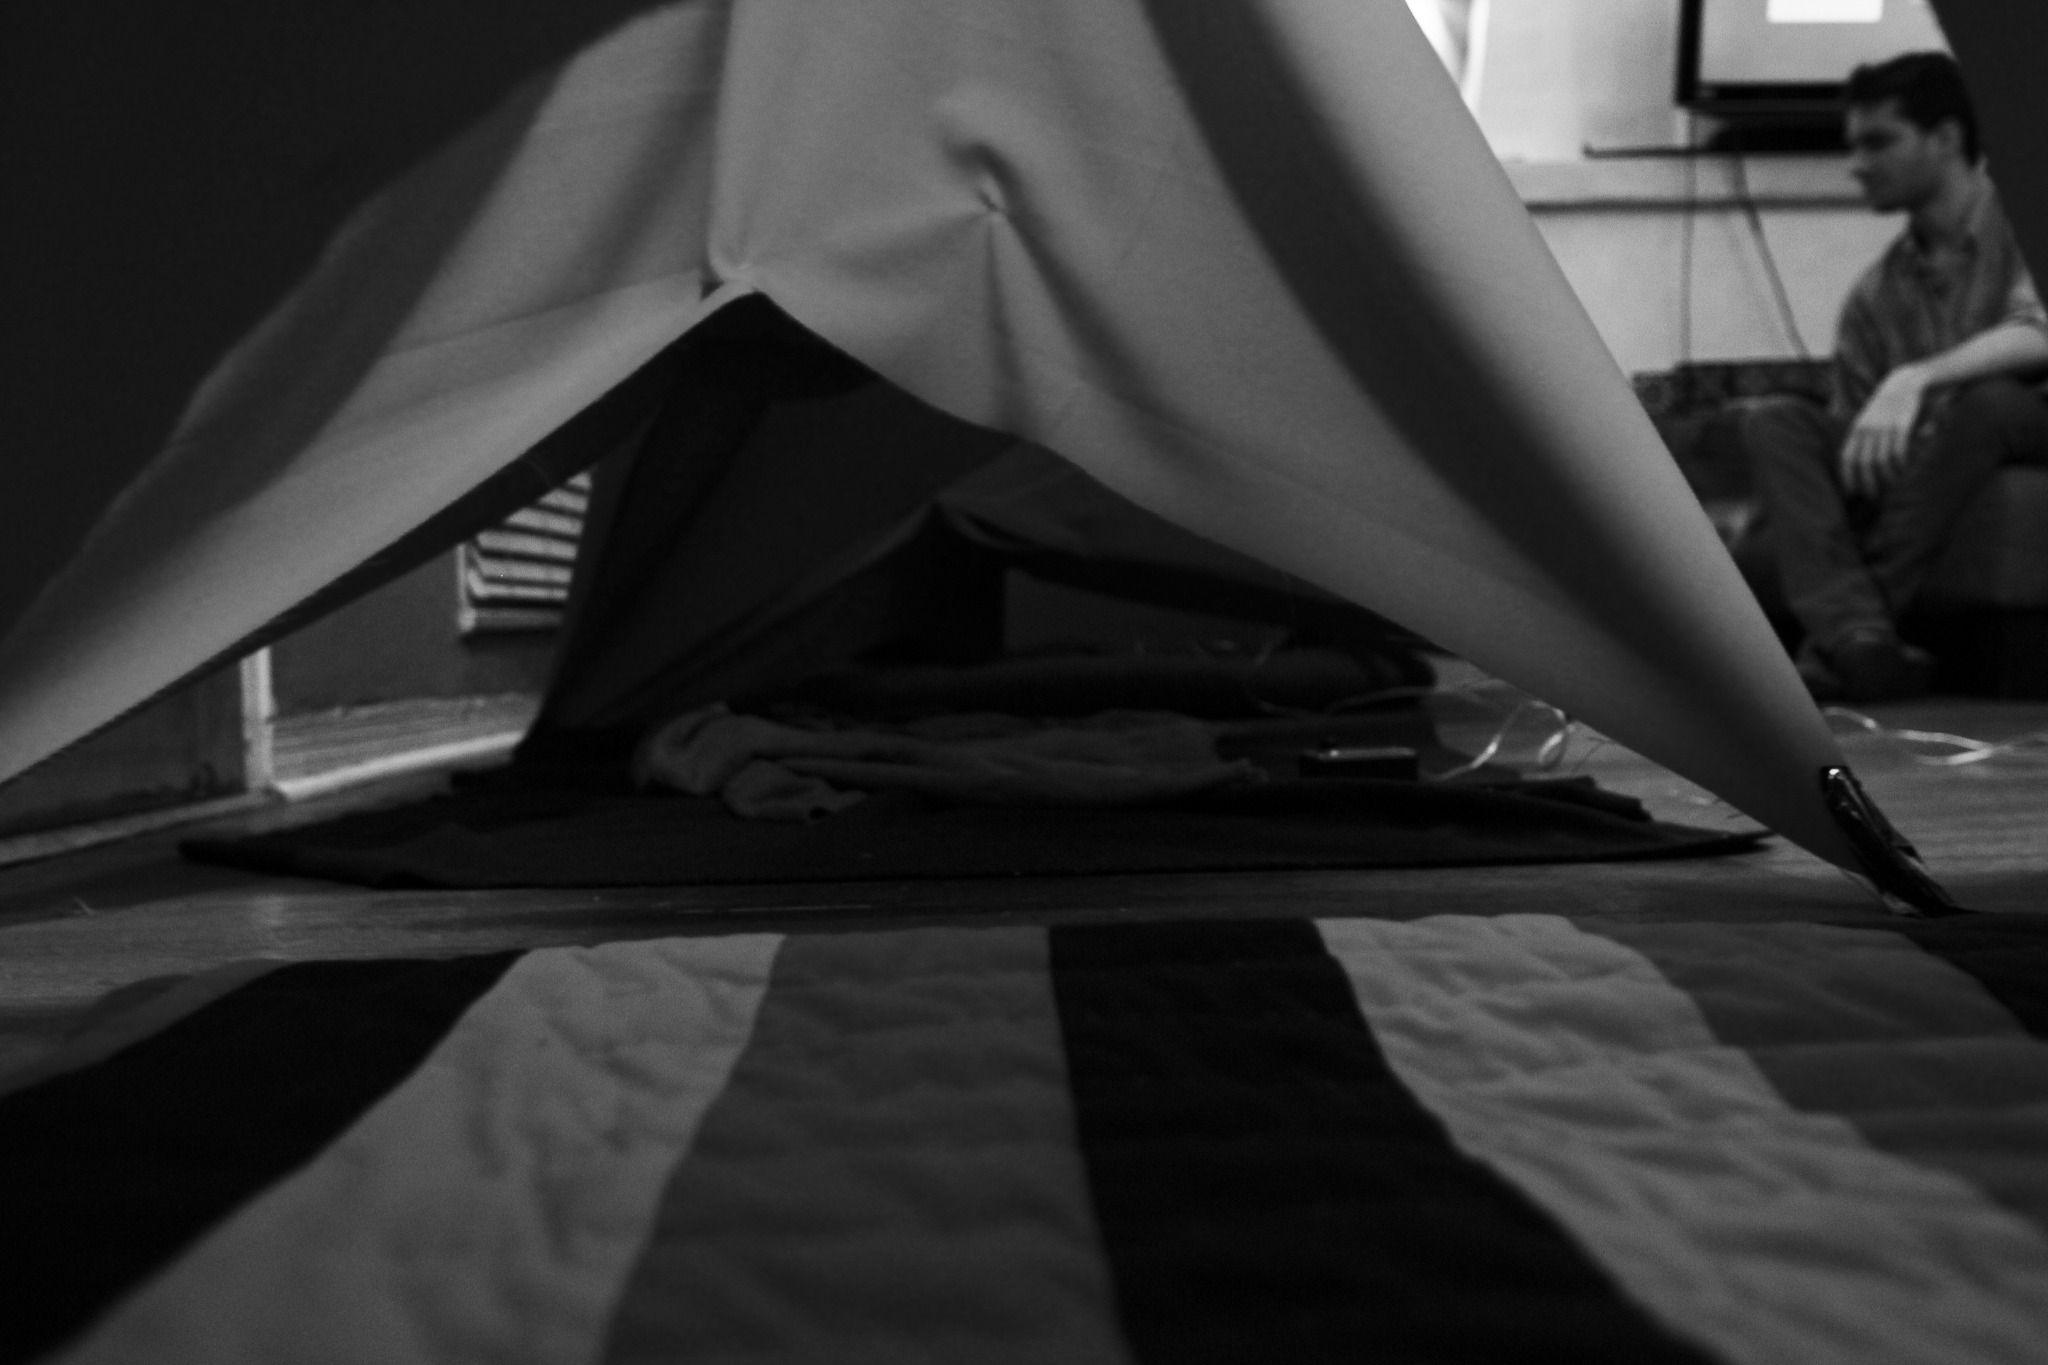 This is a photo possibly taken inside of a tent that is inside a small room. Things are grayscale and almost too dark to see, and a majority of the picture is obscured by the floor or the tent fabric. On the top right corner background there is a person t